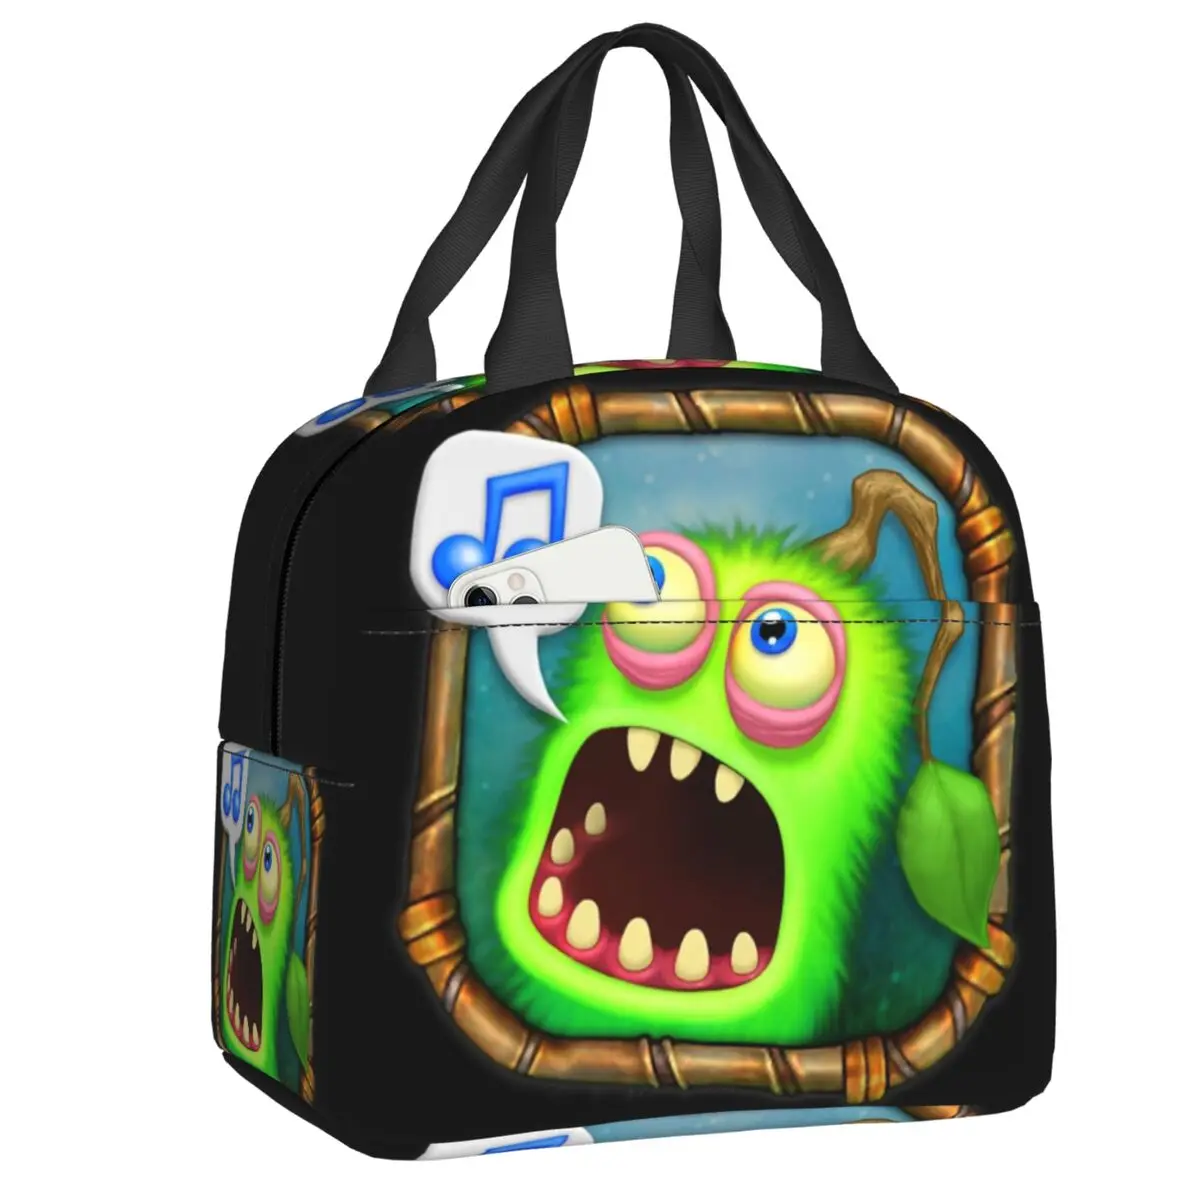 My Singing Monsters Cartoon Insulated Lunch Bag For Camping Travel Video  Game Waterproof Thermal Cooler Bento Box Women Kids - Lunch Bags -  AliExpress